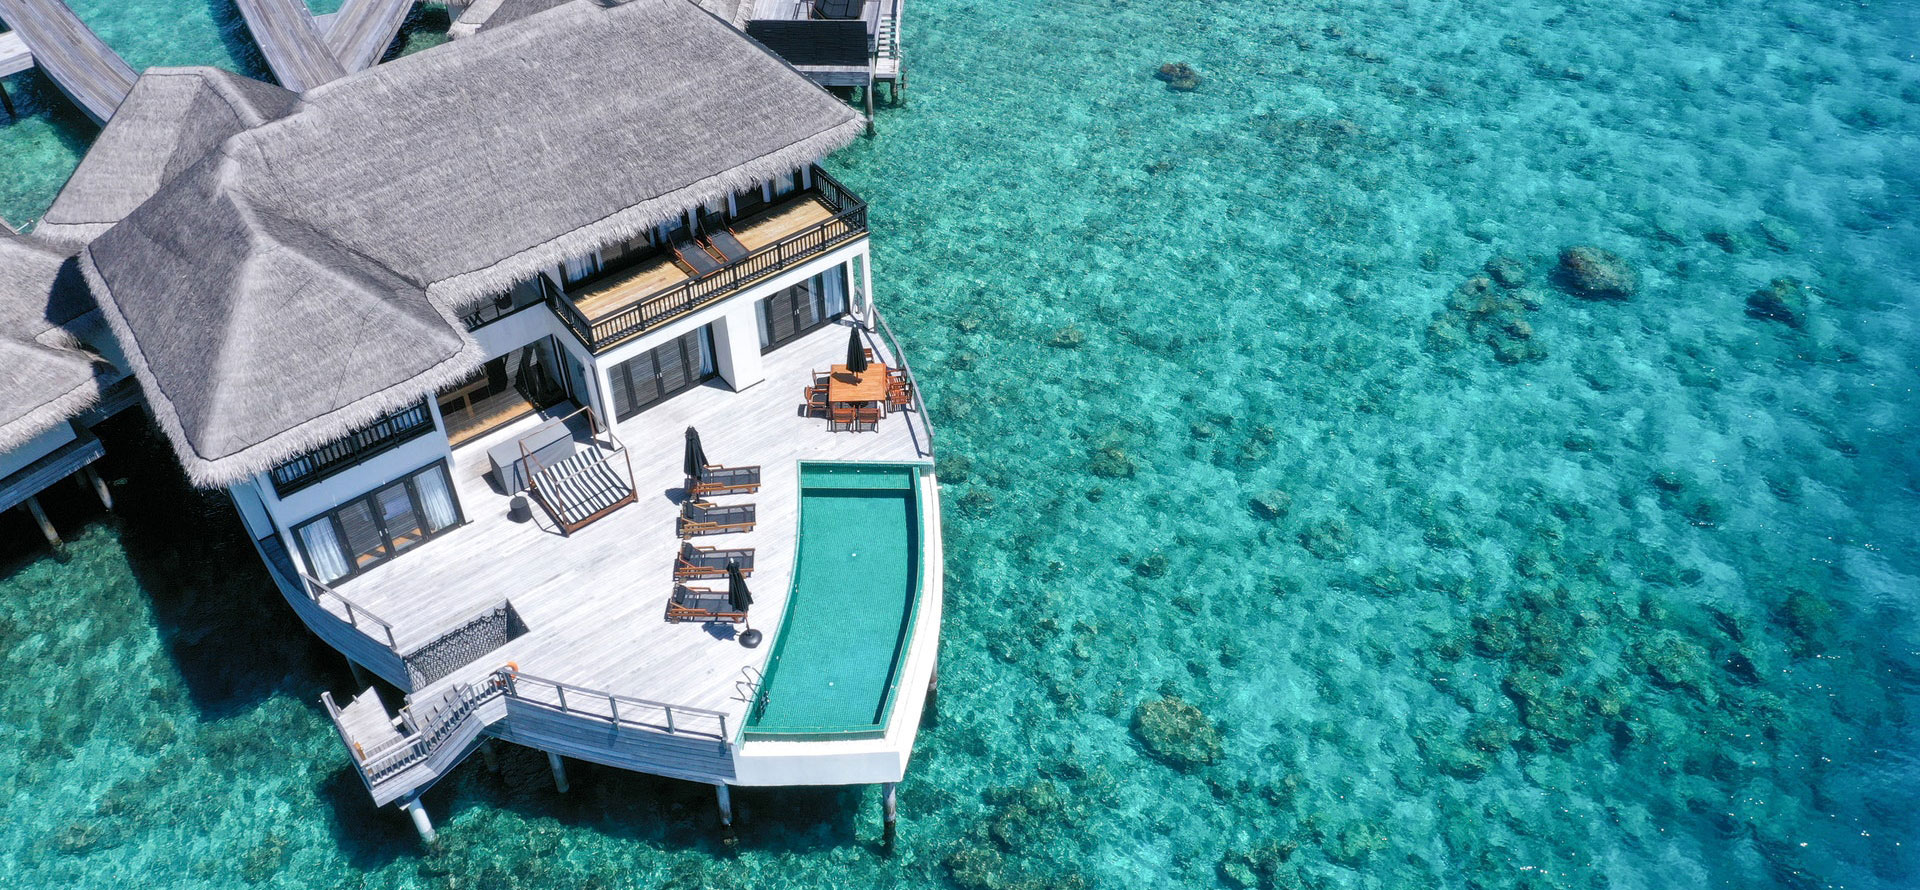 Thailand overwater bungalows with swimming pool.